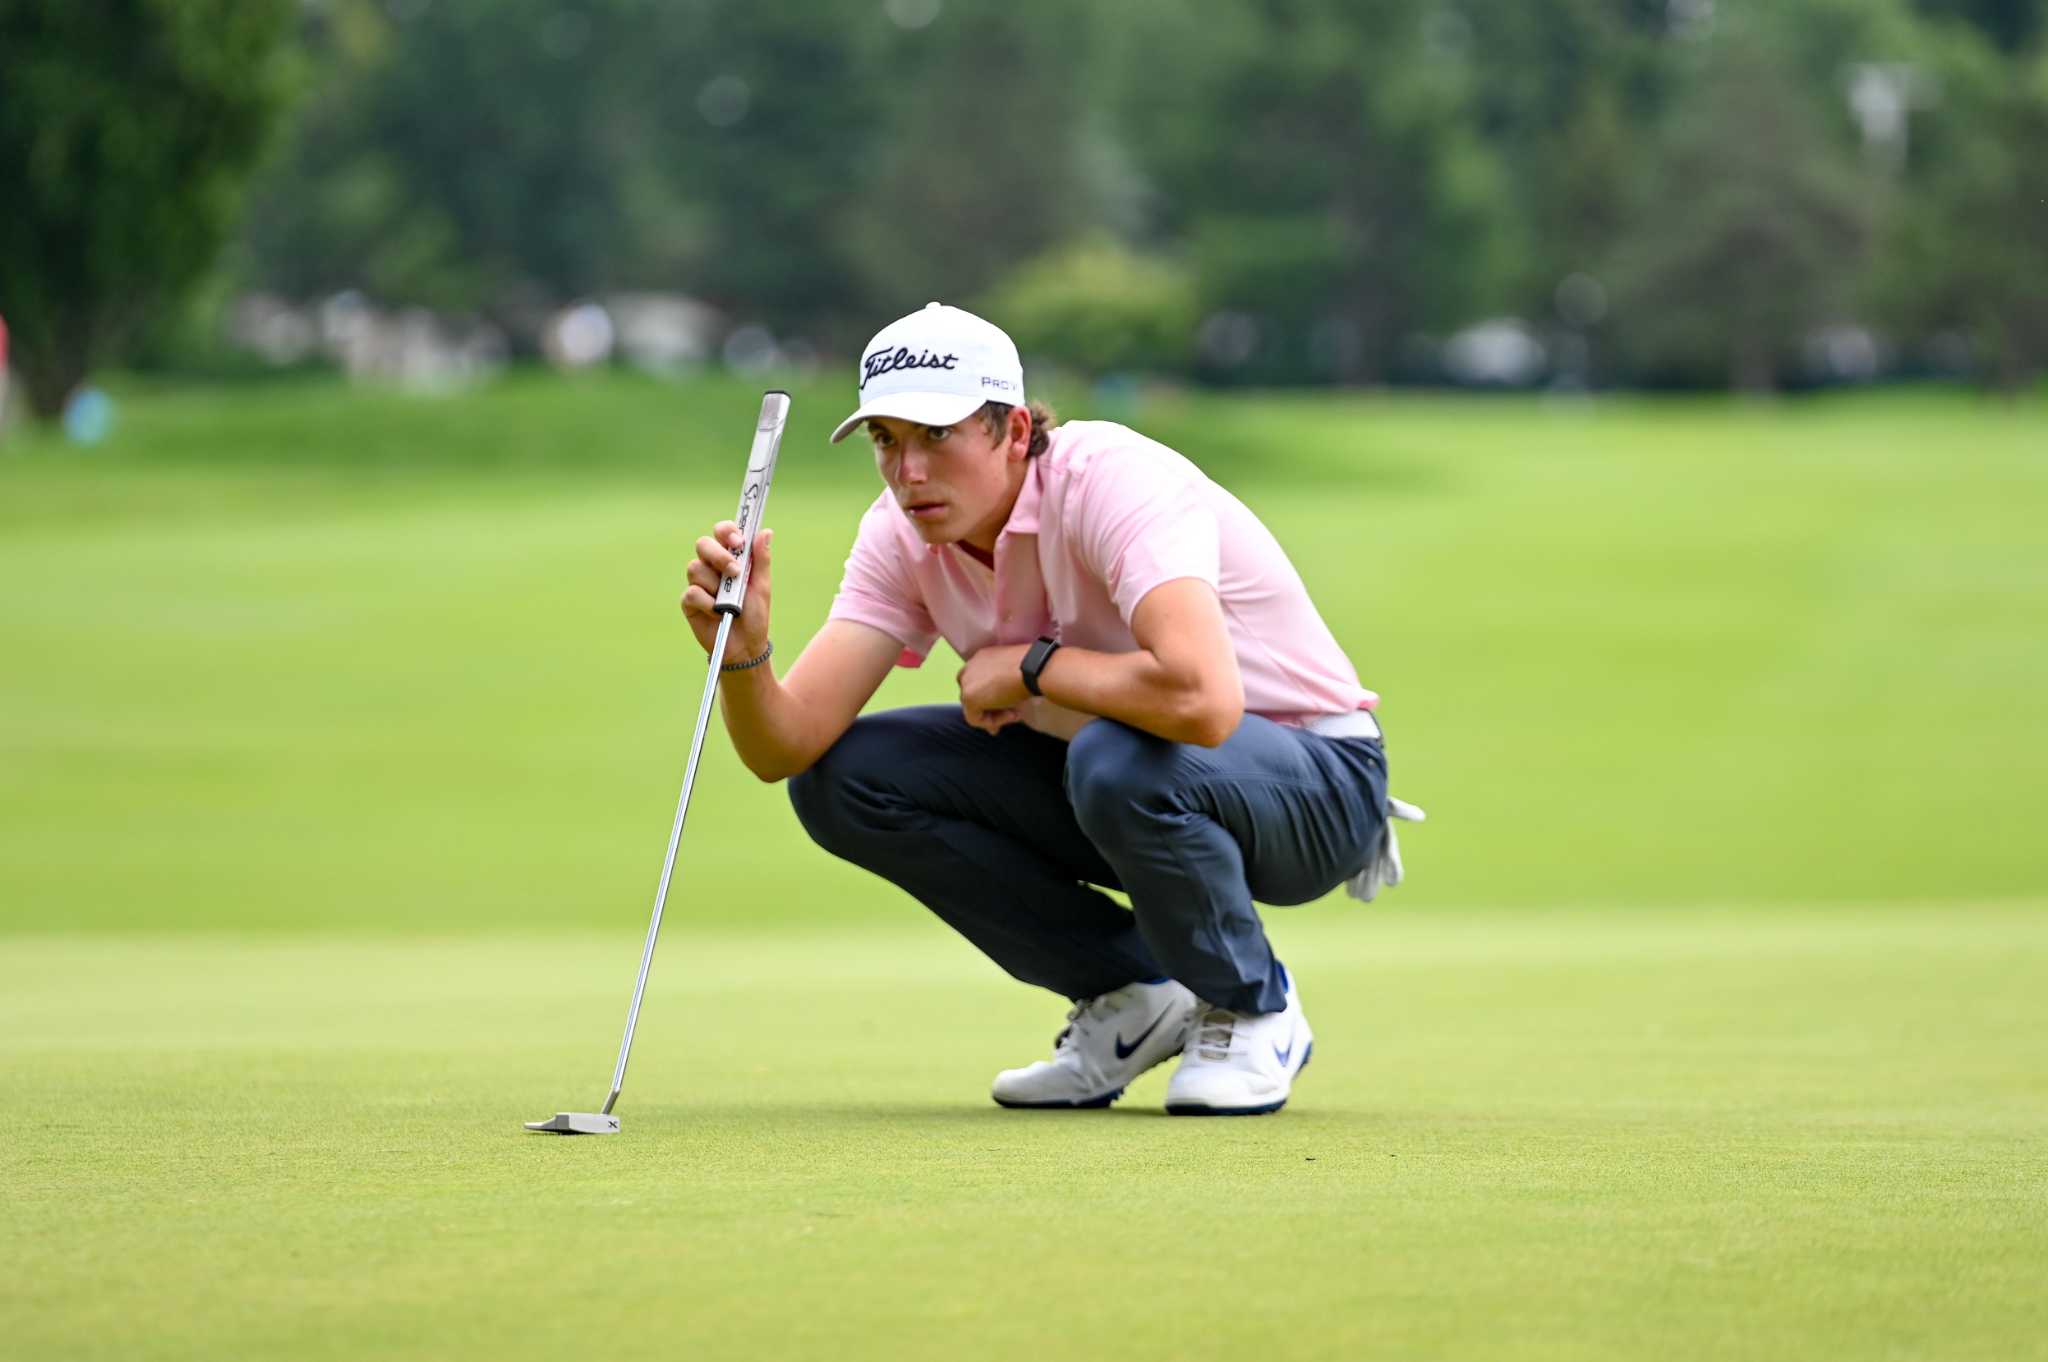 Connecticut golfer, Virginia All-American Ben James to play in next week's U.S. Open Championship